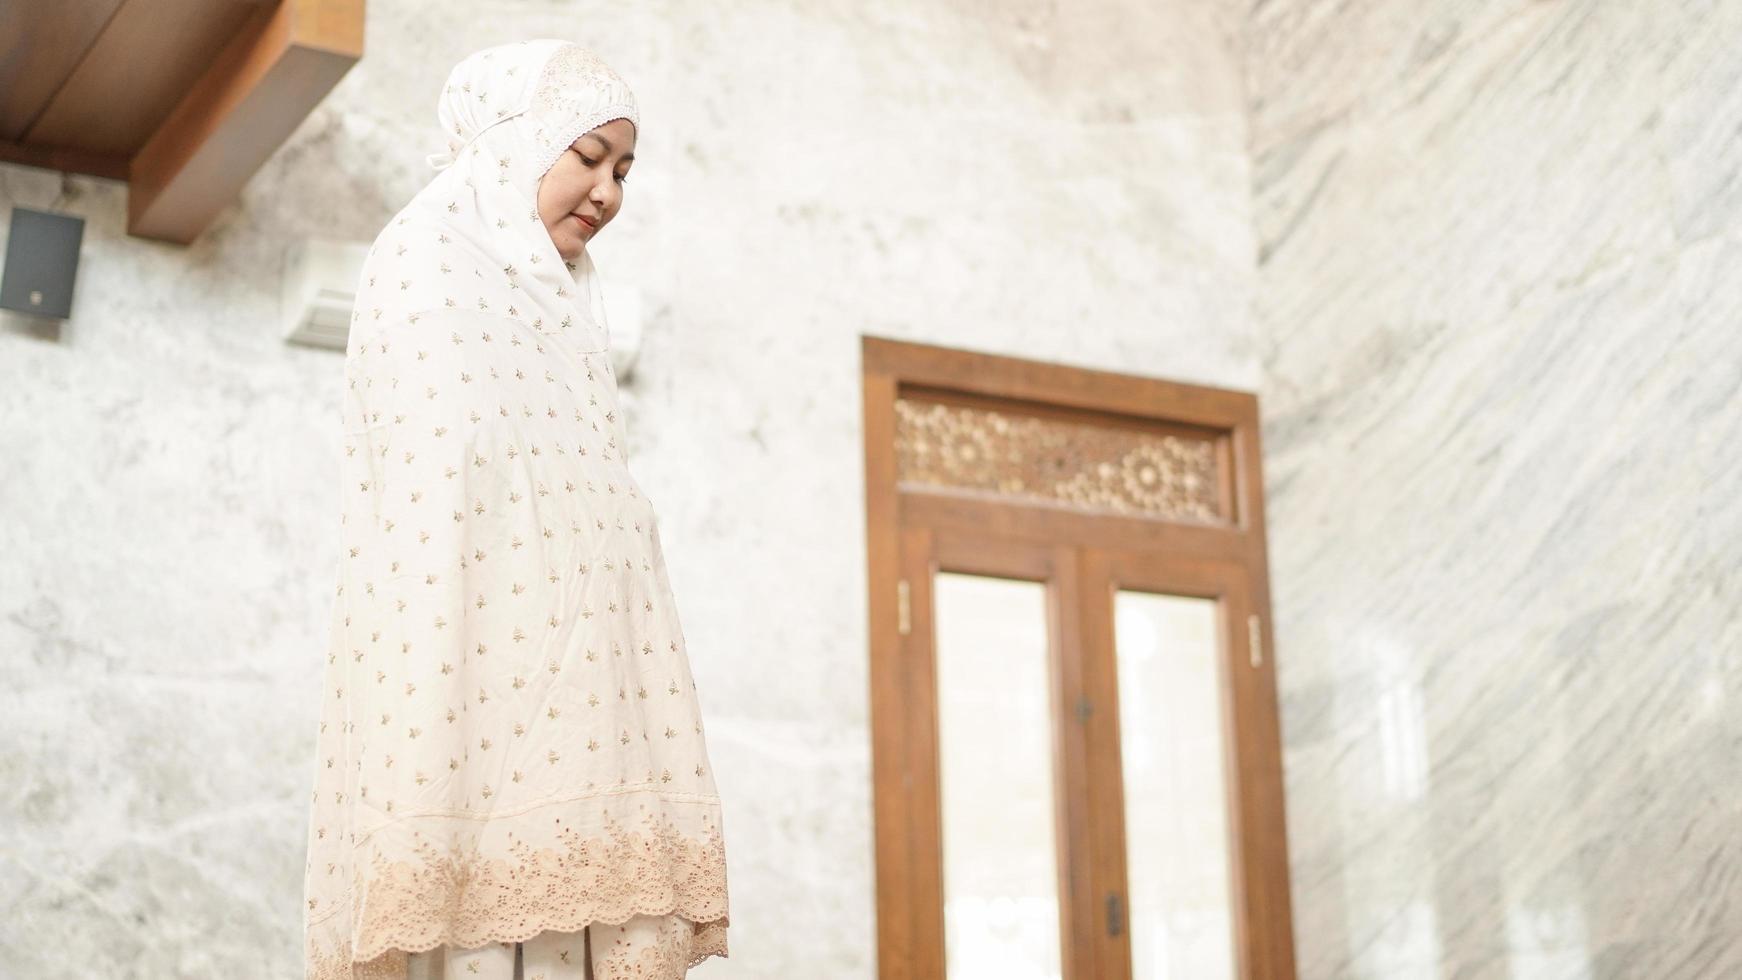 Asian Muslim women perform the obligatory prayers in the mosque photo